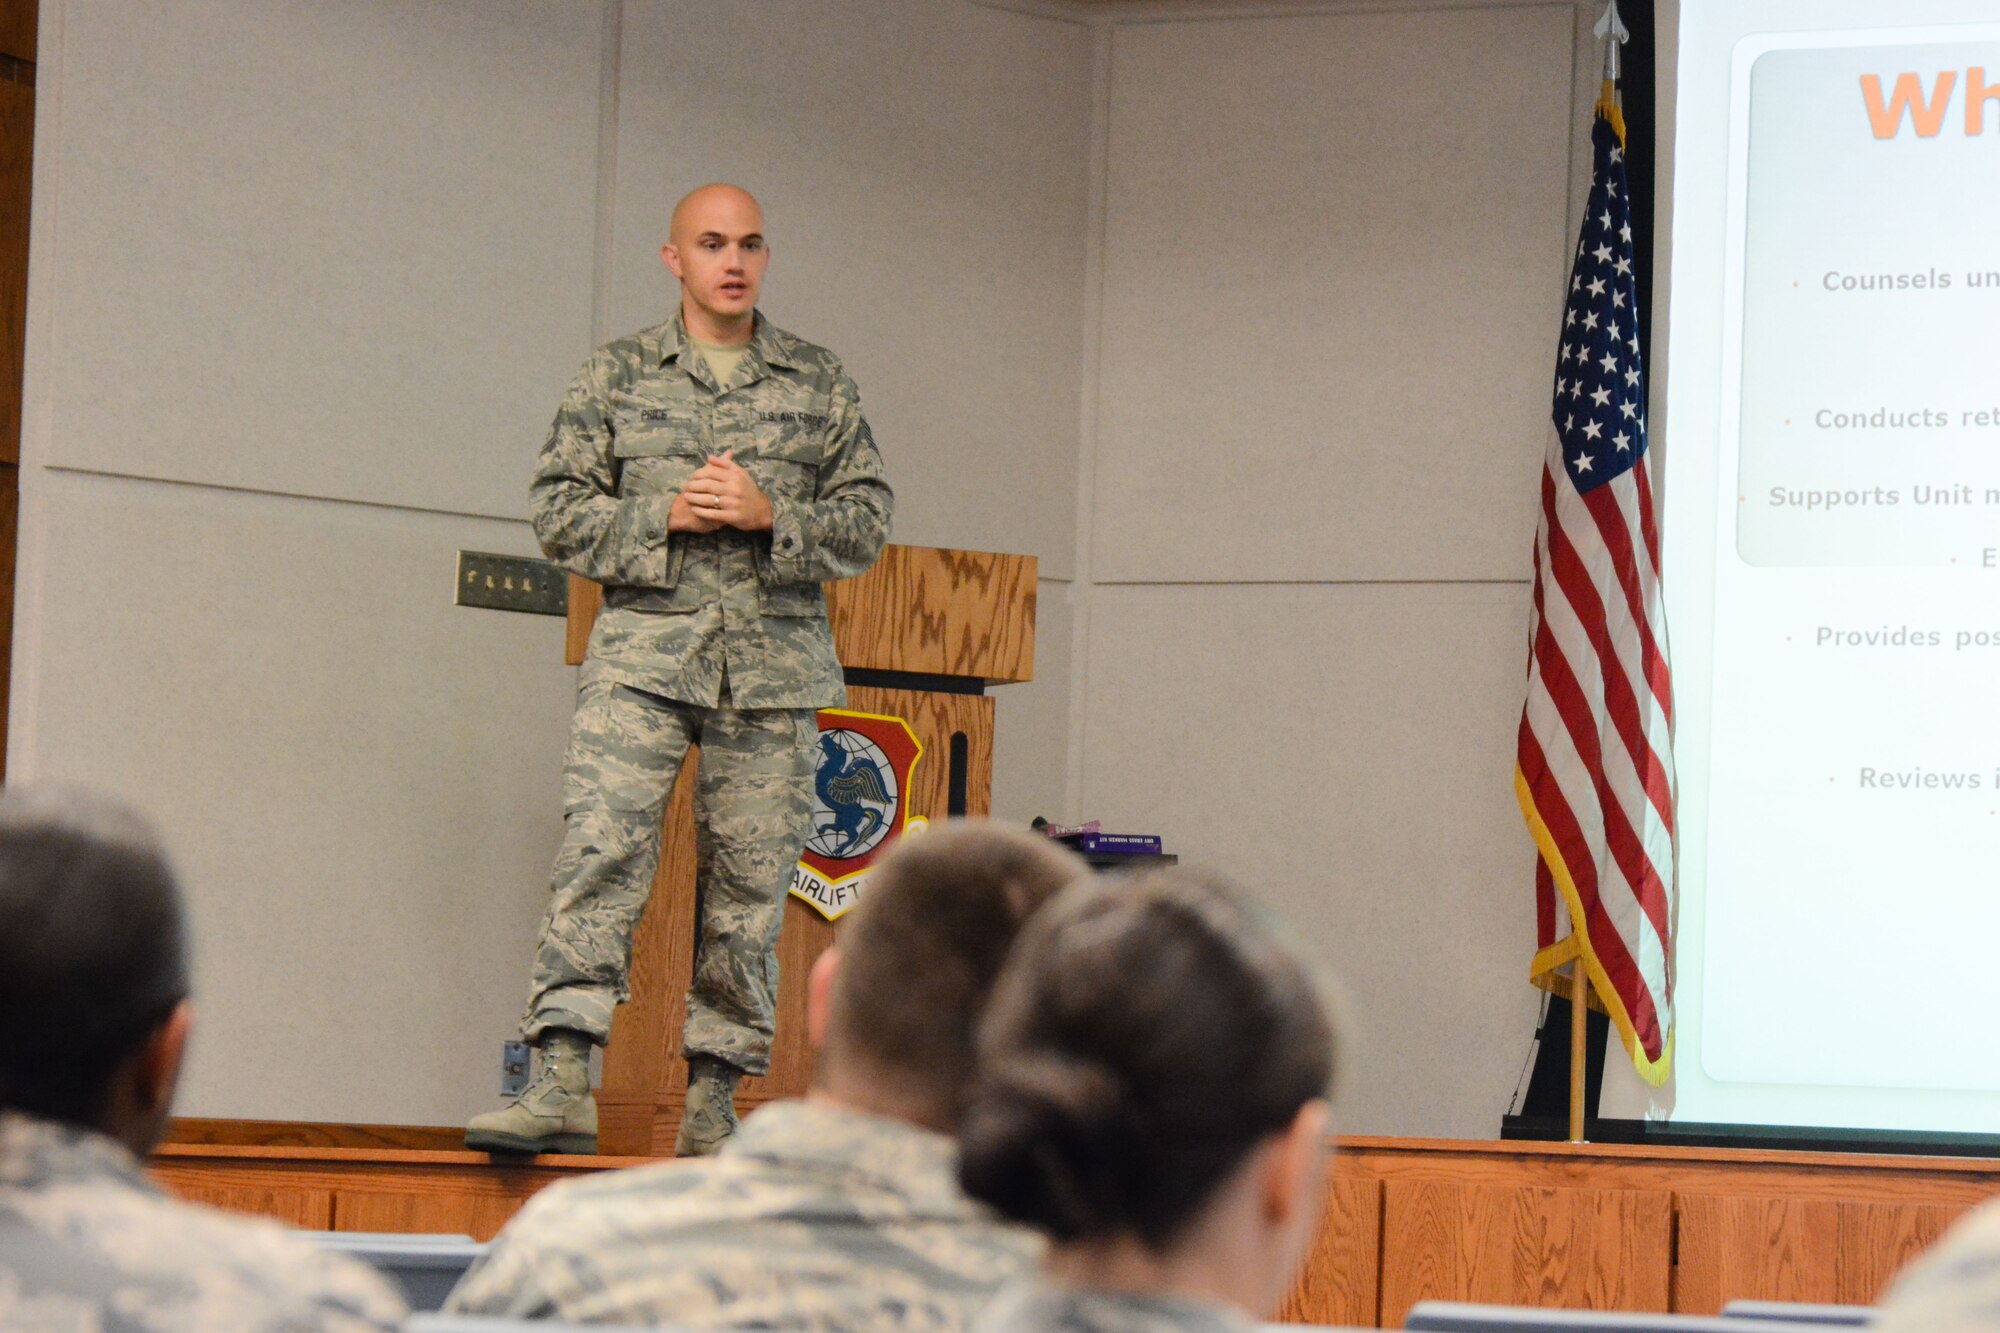 U.S. Air Force Tech. Sgt. Matthew Price, a recruiter assigned to the 139th Airlift Wing, Missouri Air National Guard, speaks to unit career advisors at Rosecrans Air National Guard Base, St. Joseph, Mo., Aug. 8, 2015. Price is the interim retention office manager and is in charge of the unit career advisor program. (U.S. Air National Guard photo by Tech. Sgt. Michael Crane)